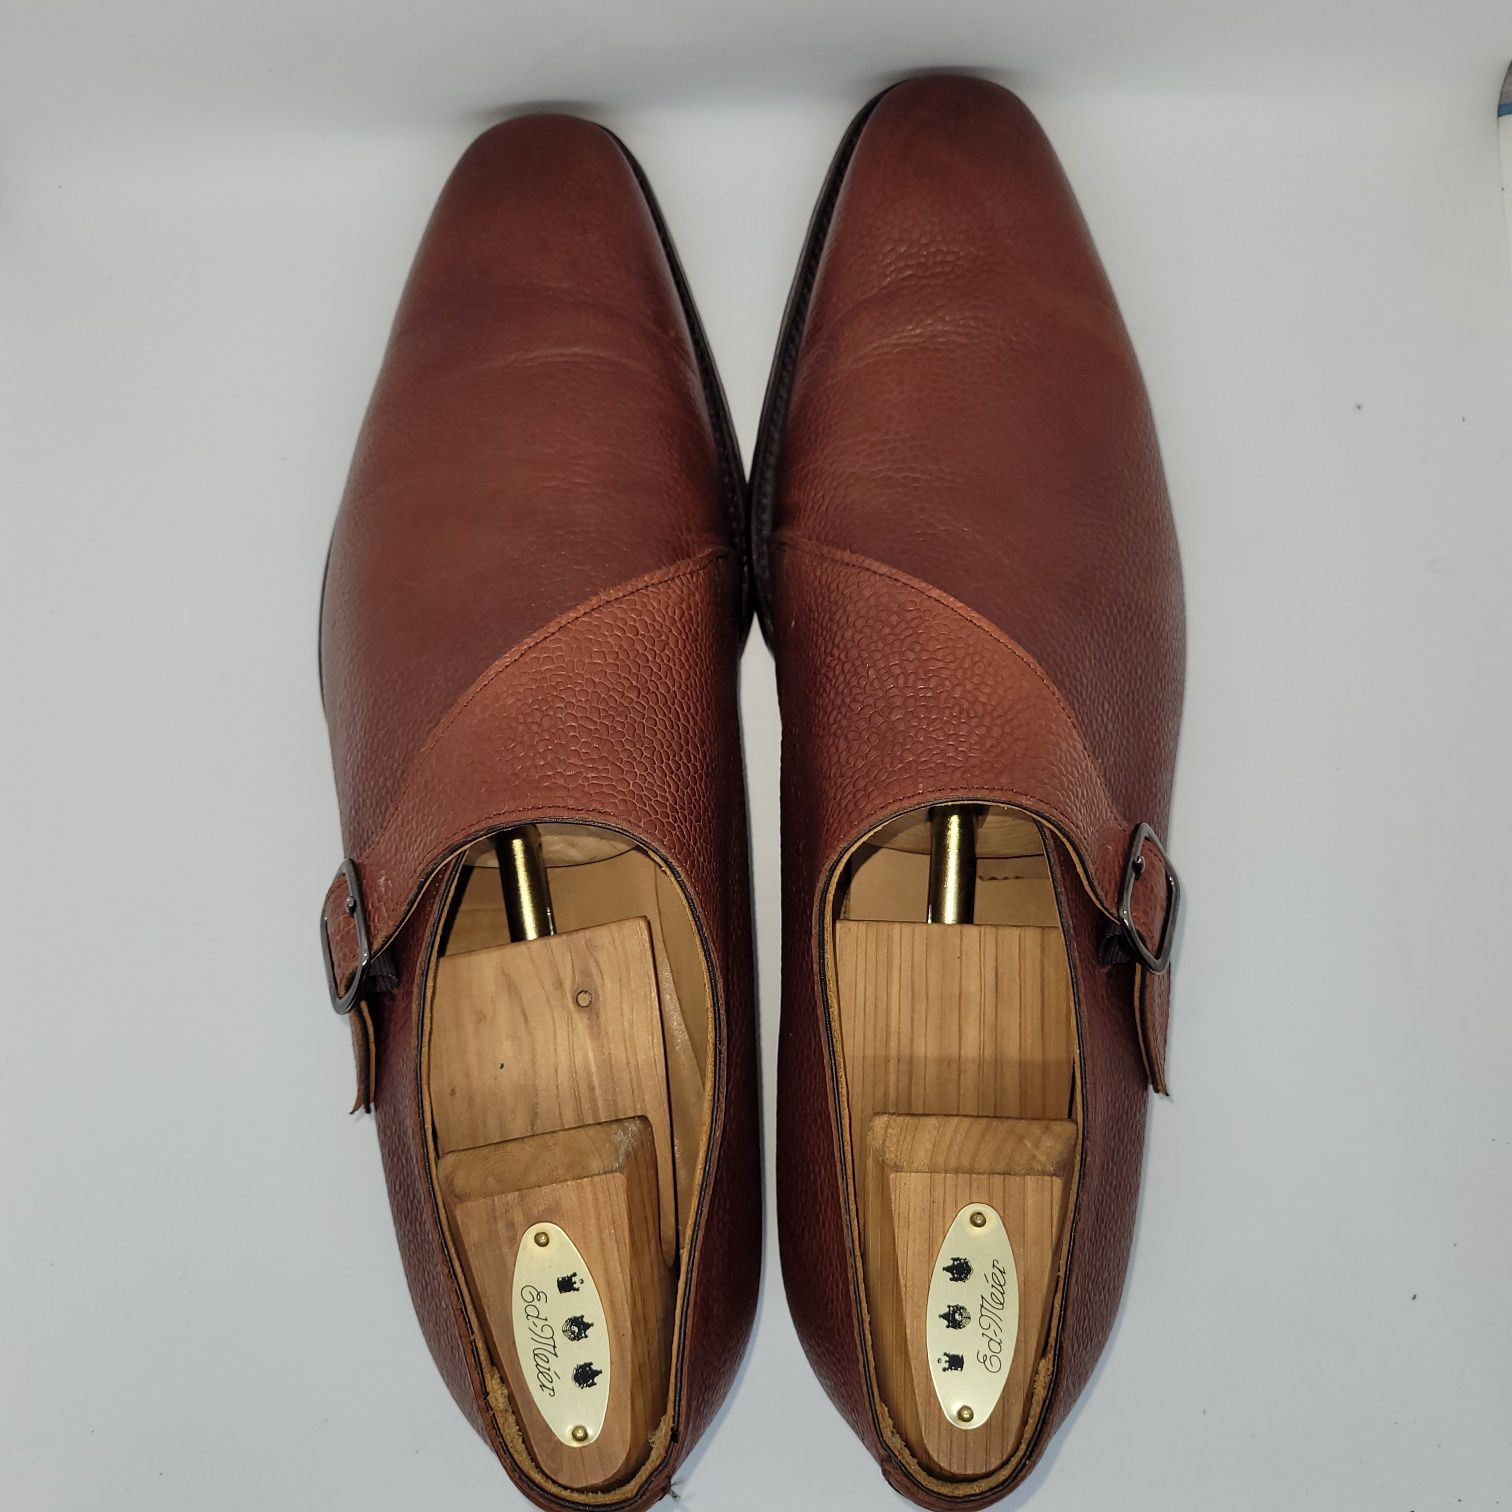 Joseph Cheaney Oxted Monk Shoe in Bronze Rub Off Grain, UK 10 F